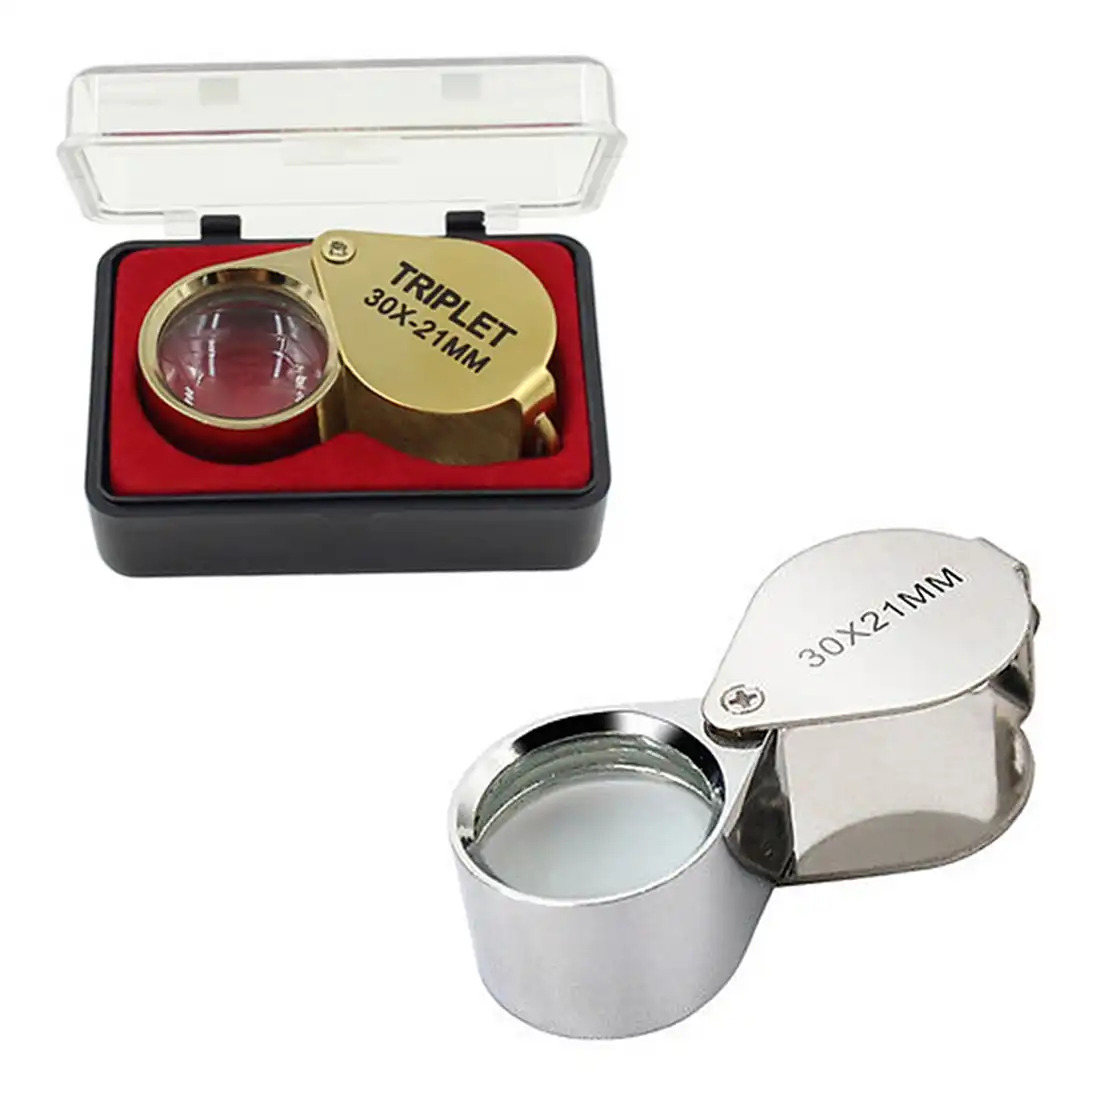 30X 21mm Jewelers Magnifier Gold Eye Loupe Jewelry Magnifying Glass ÁÁ